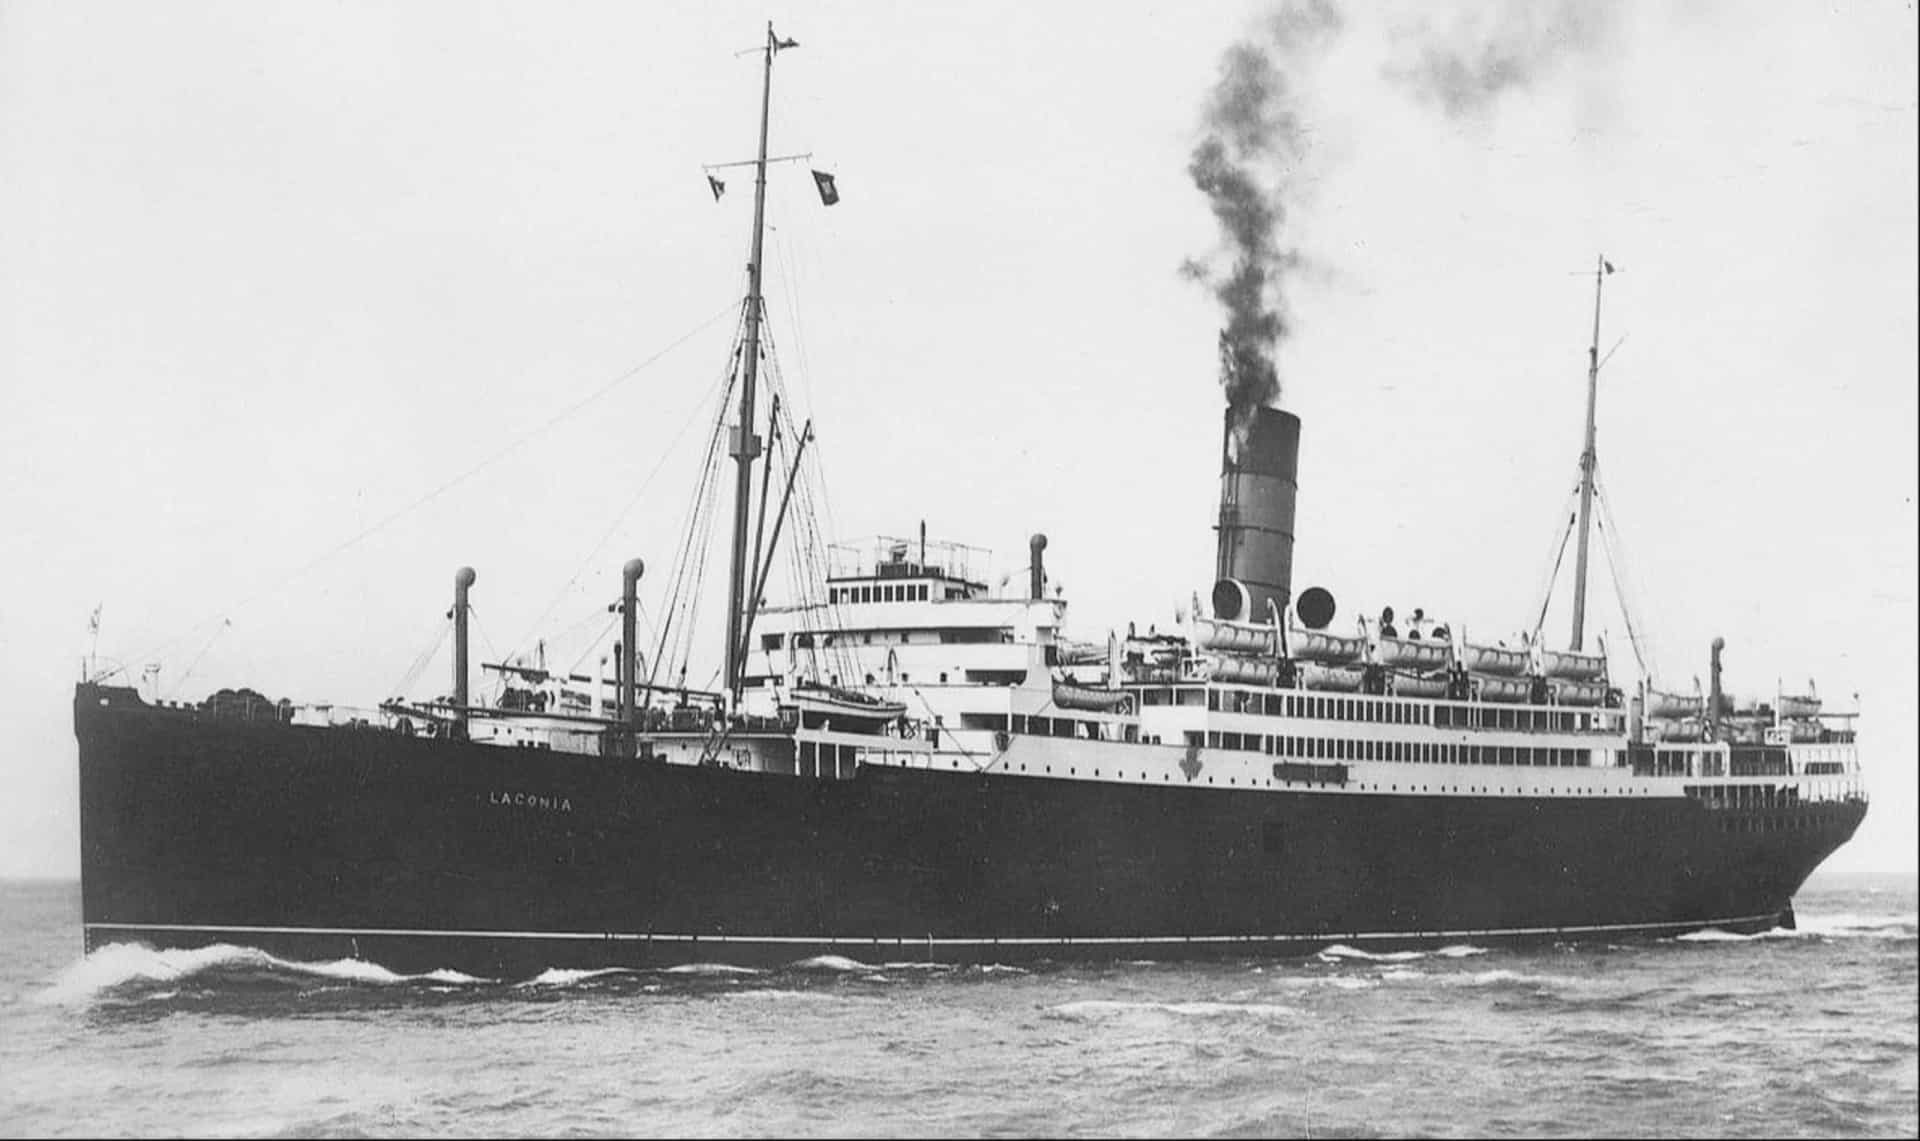 <p>In November 1922, the Cunard-operated RMS <em>Laconia</em> began an around-the-world cruise—the first continuous circumnavigation of the world by a passenger liner, a voyage later dubbed the first world cruise. It marked a triumph for the company, and a milestone in the history of the cruise industry. But 20 years later, <em>Laconia</em> would be involved in one of the most controversial events of the Second World War.</p><p>You may also like:<a href="https://www.starsinsider.com/n/454355?utm_source=msn.com&utm_medium=display&utm_campaign=referral_description&utm_content=597926en-za"> Famous figures who lived to 100 and beyond</a></p>